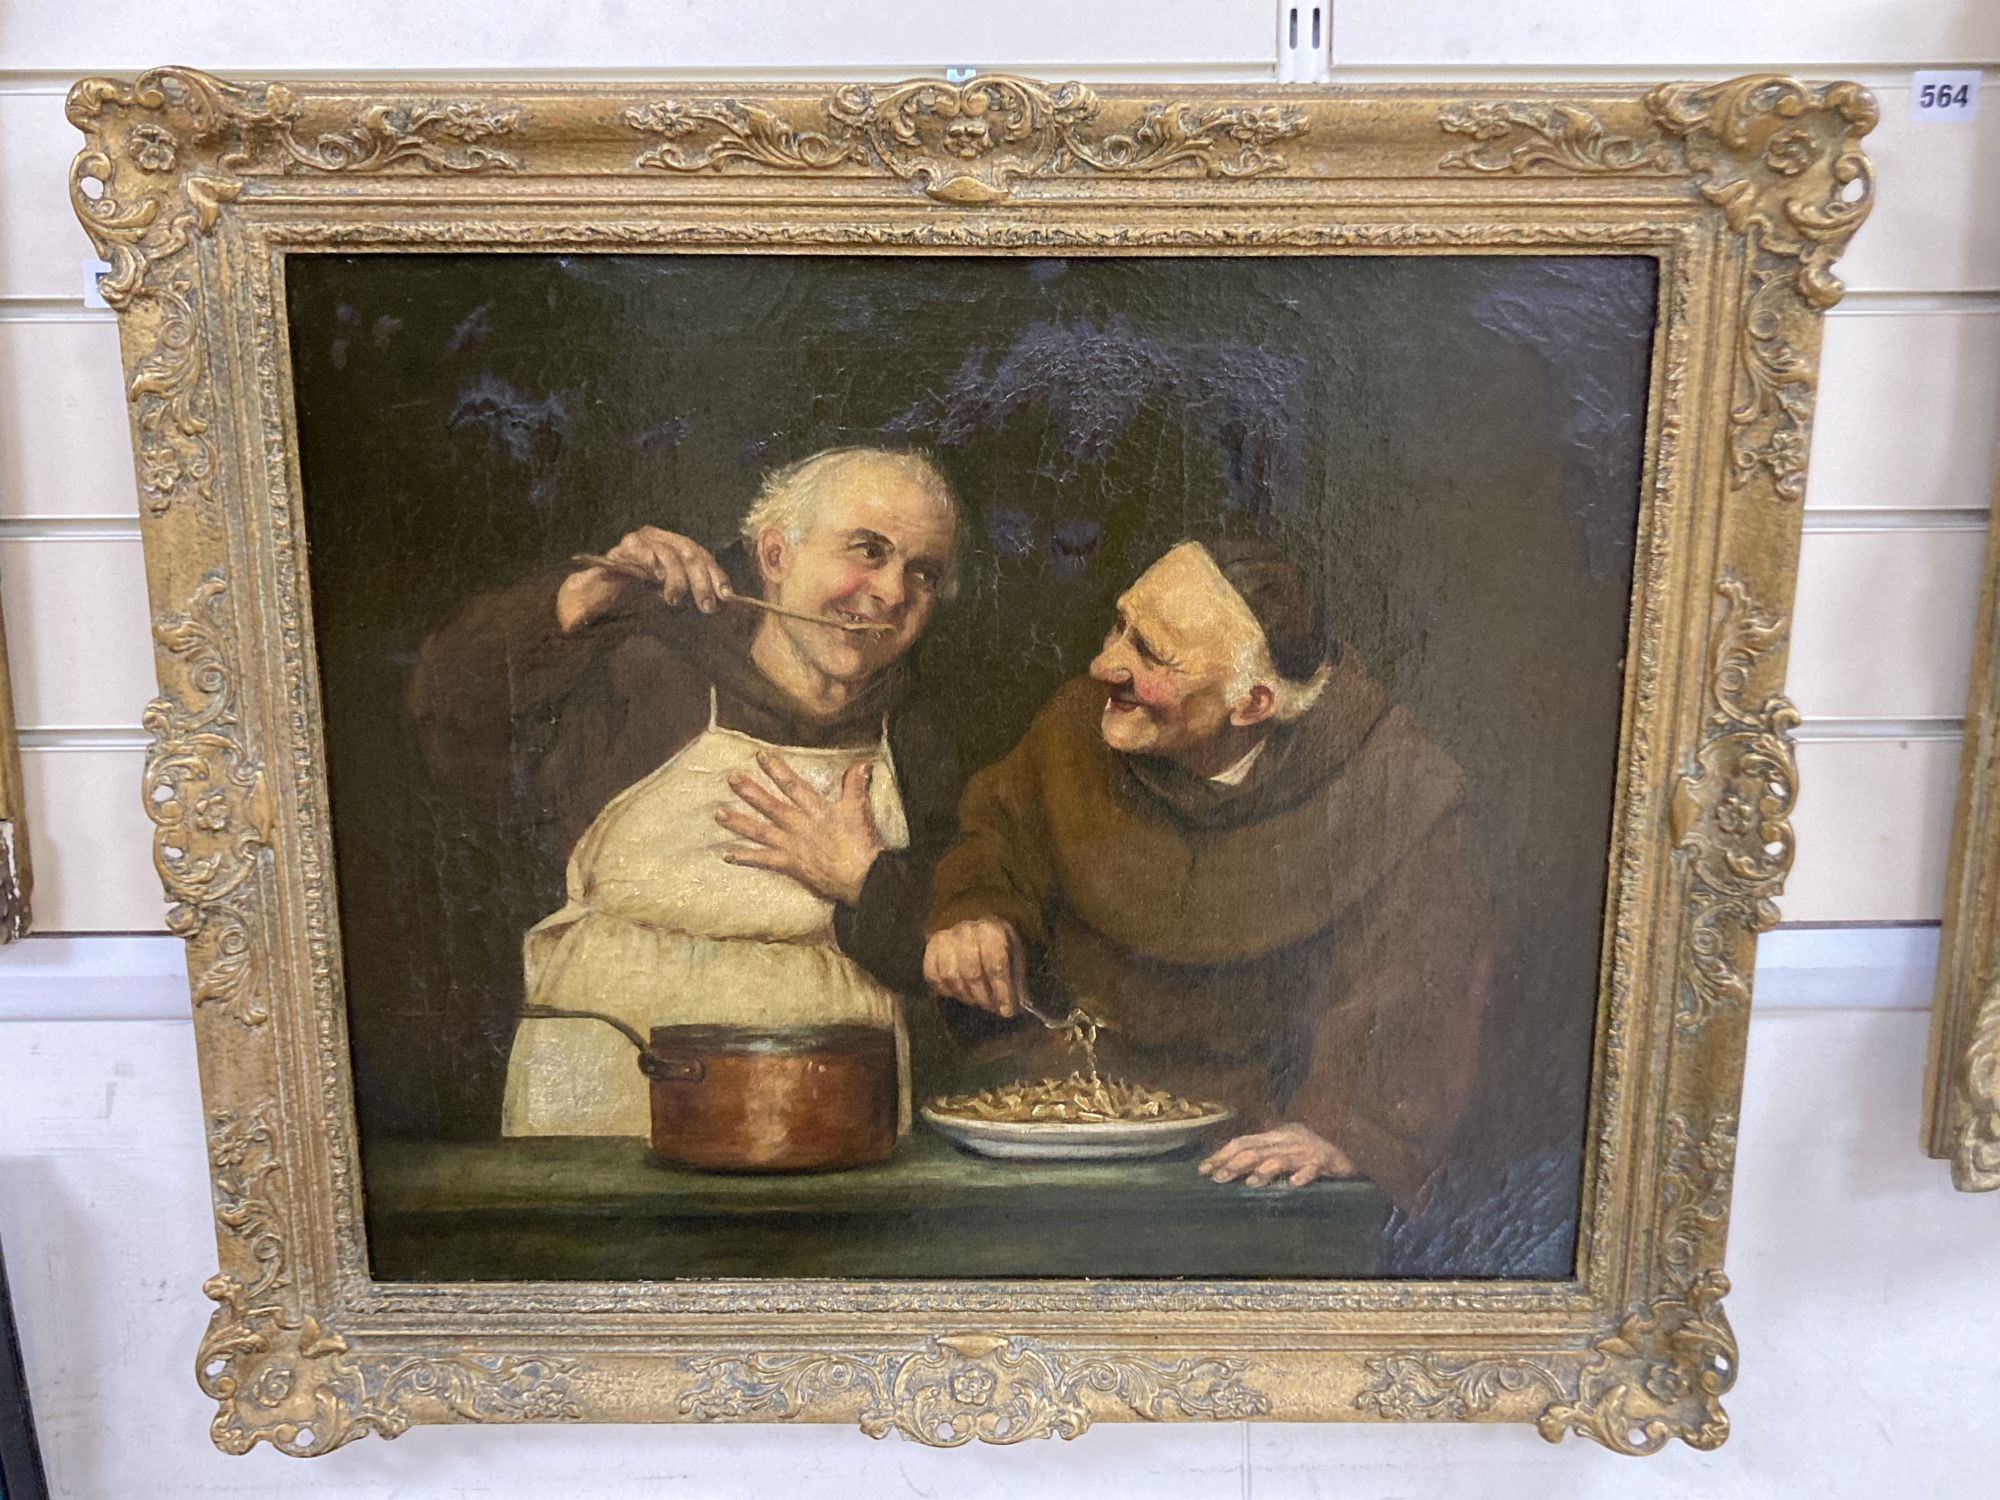 Morson Wood, oil on canvas, Monks in a scullery, after Sadler, 50 x 60cm